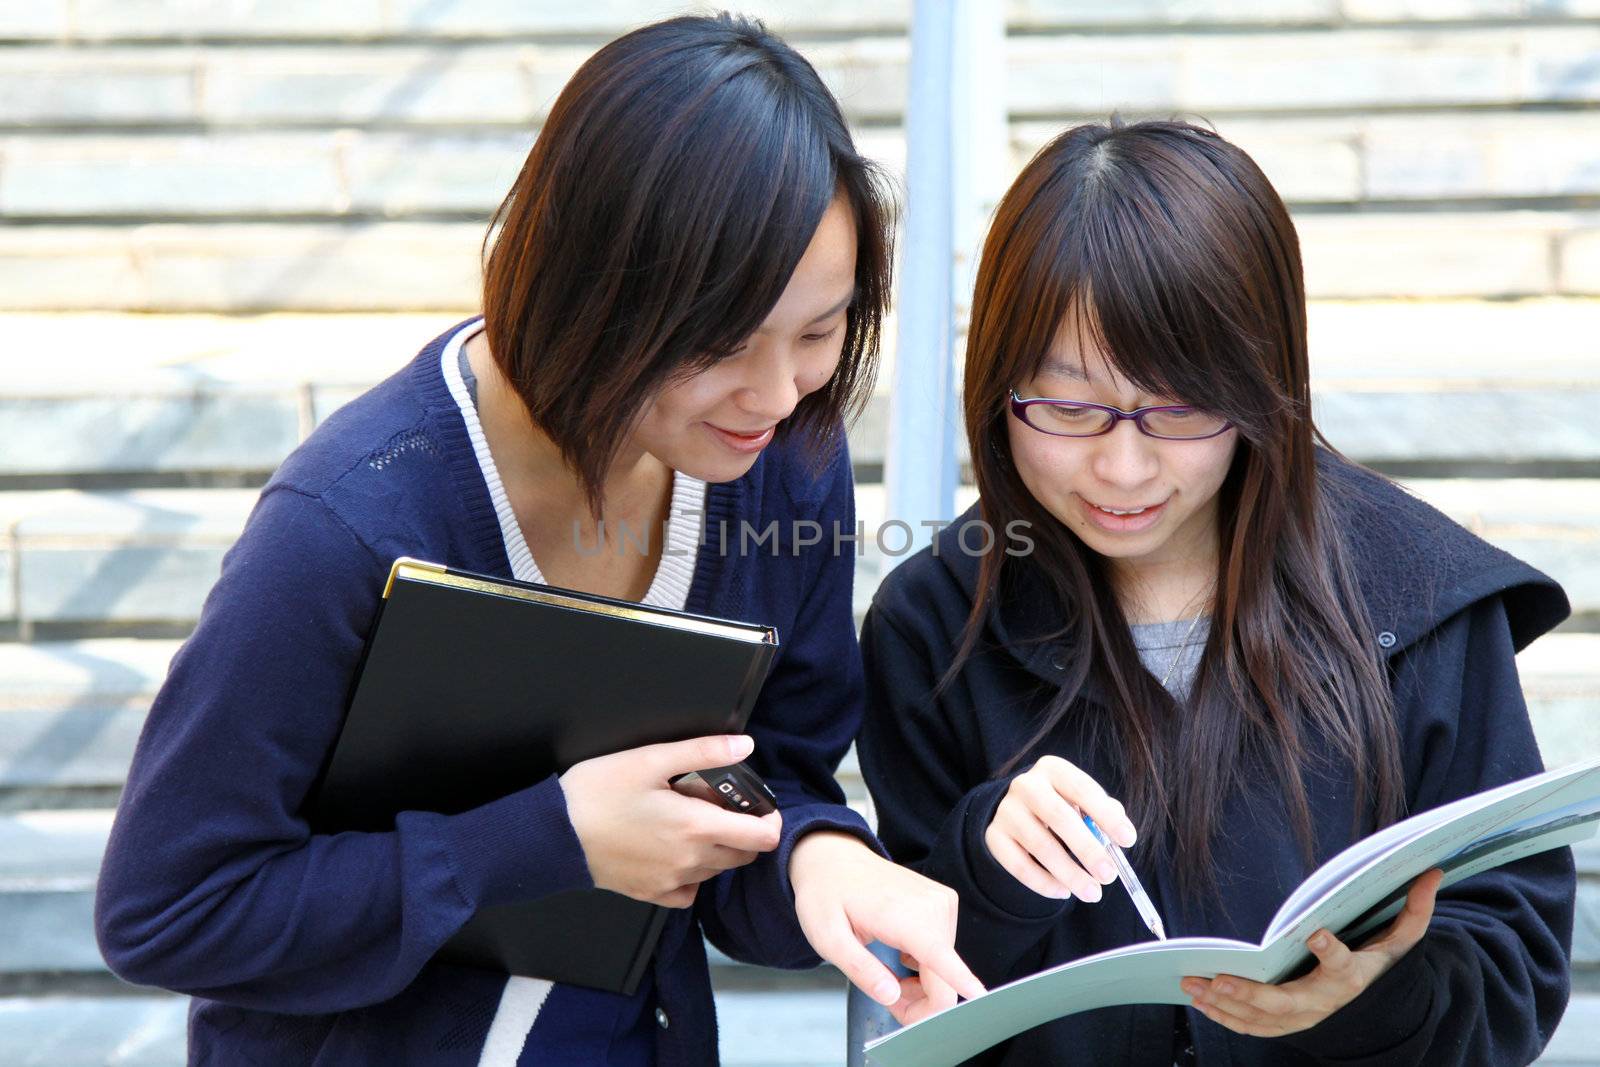 Asian students studying and discussing in university